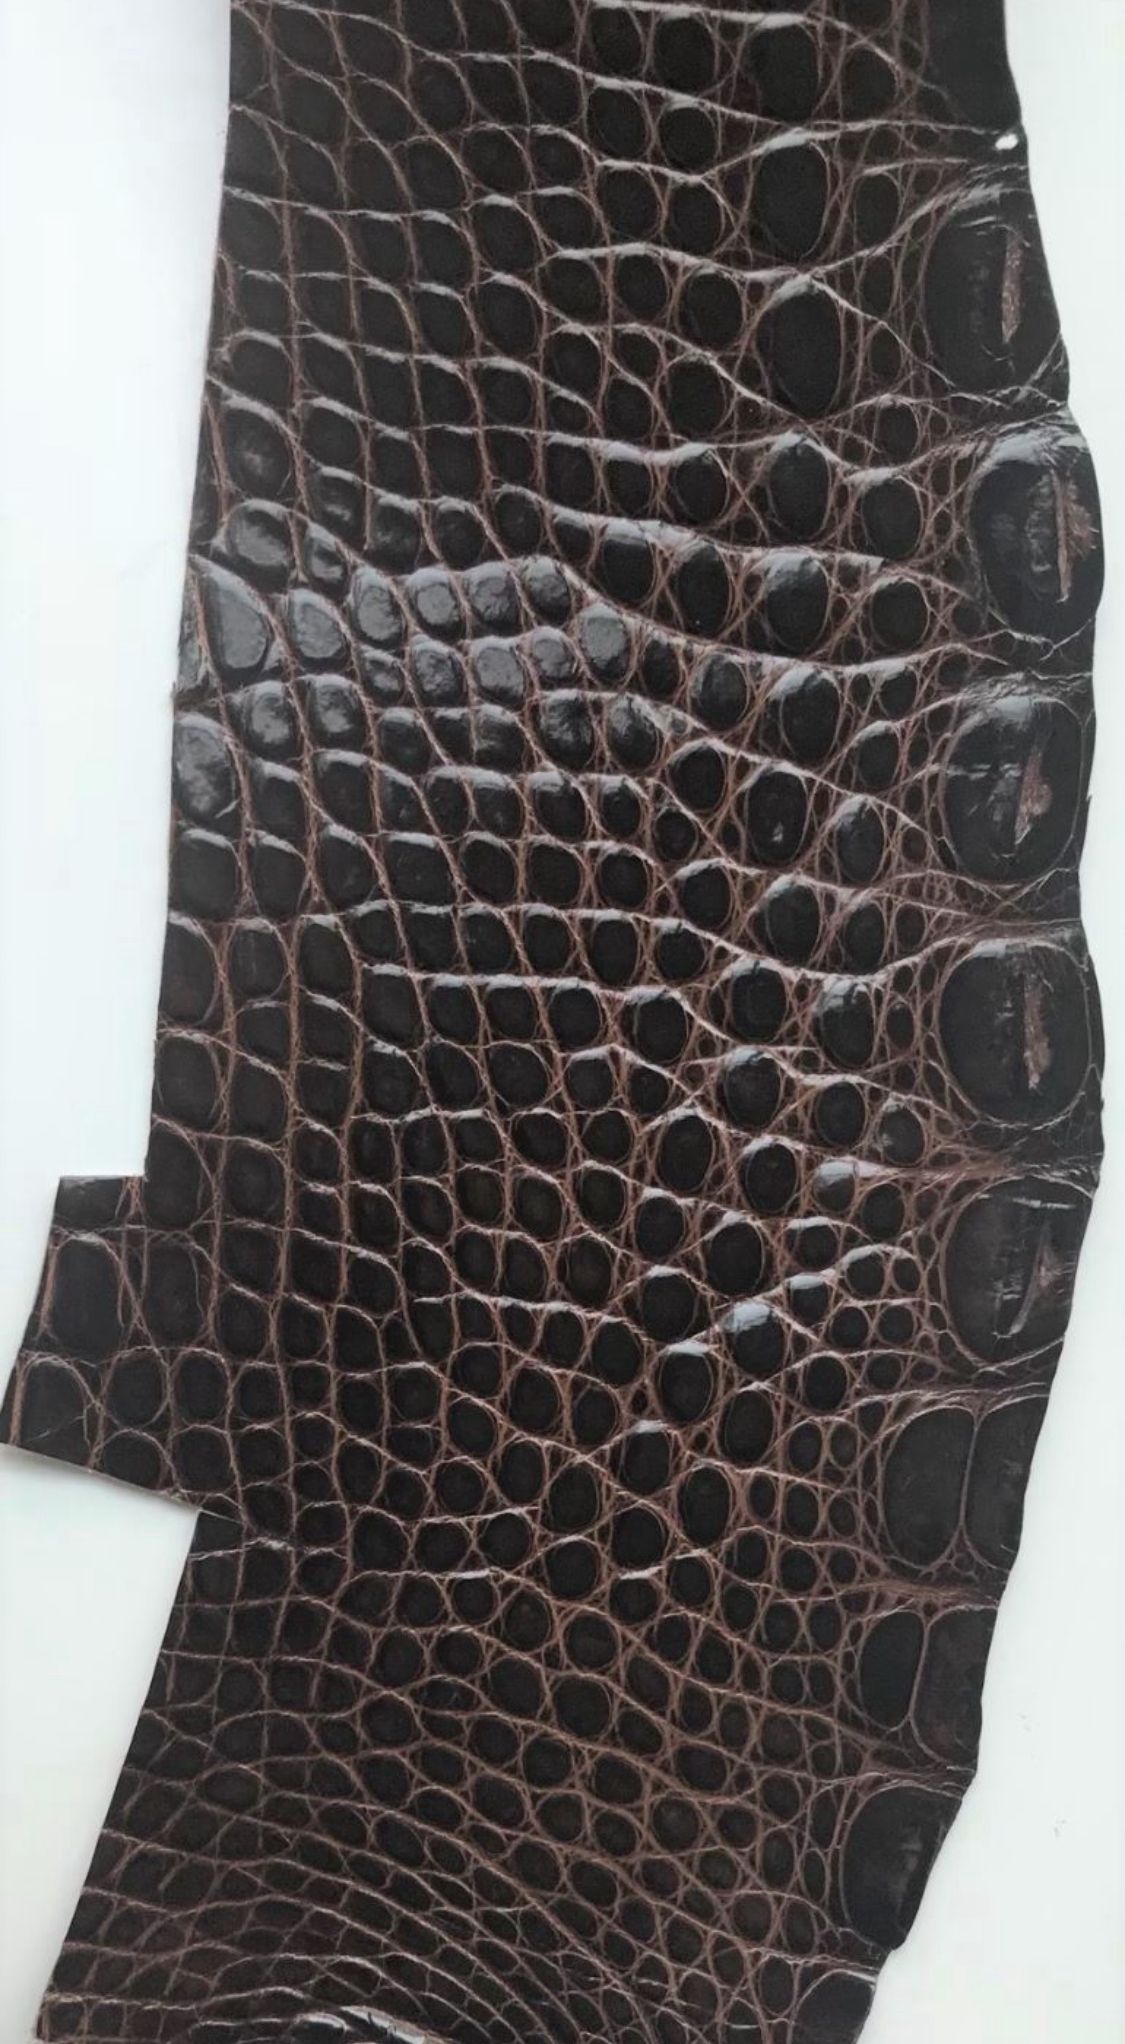 Gator Flanks (Various Colors) - Grade 1 - Sunny Exotic Leathers